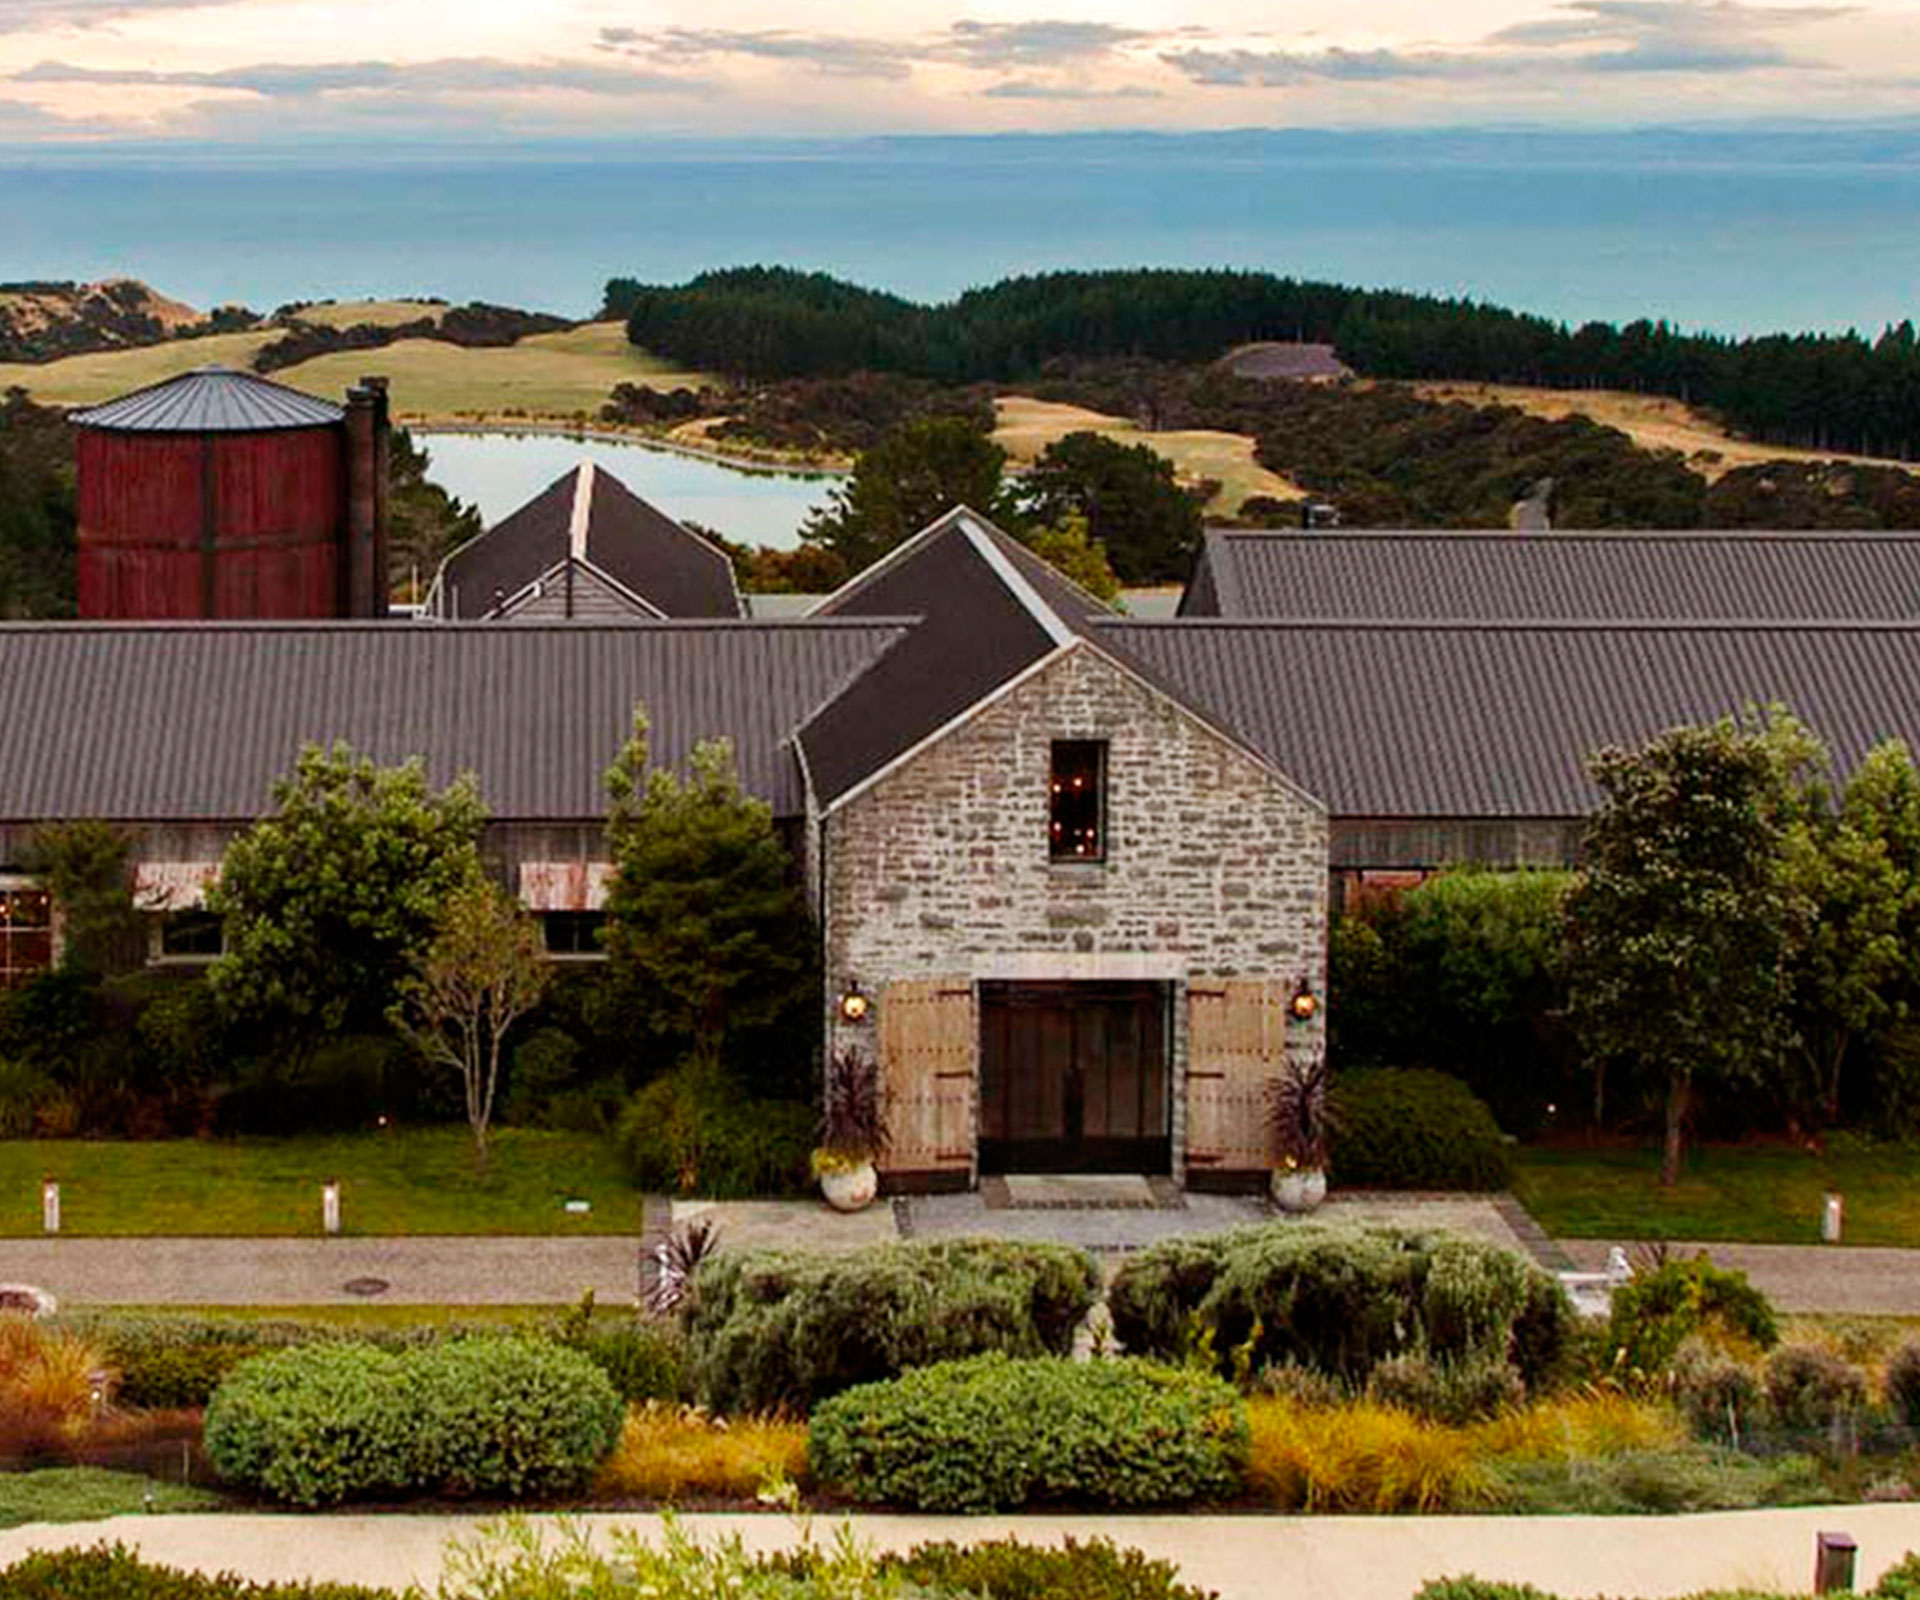 The Farm at Cape Kidnappers.